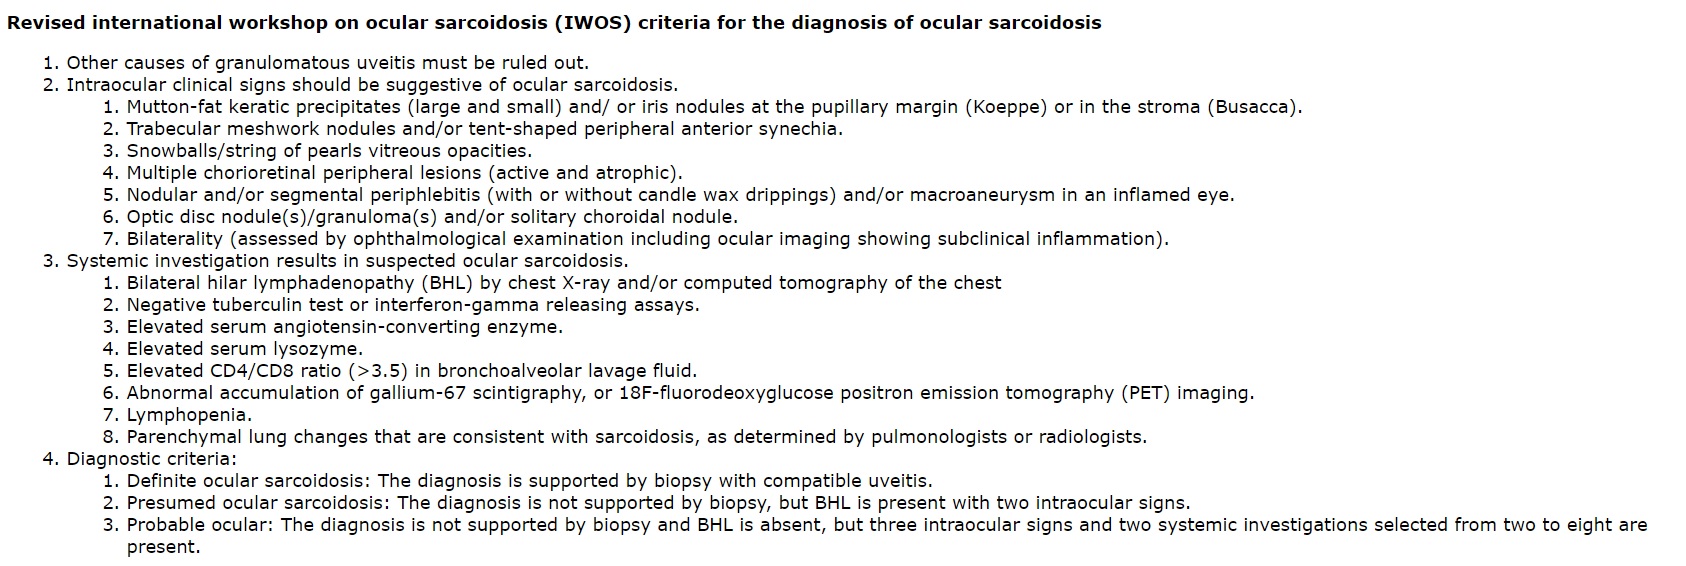 Revised criteria of International Workshop on Ocular Sarcoidosis (IWOS) for the diagnosis of ocular sarcoidosis [PMID: 30798264]